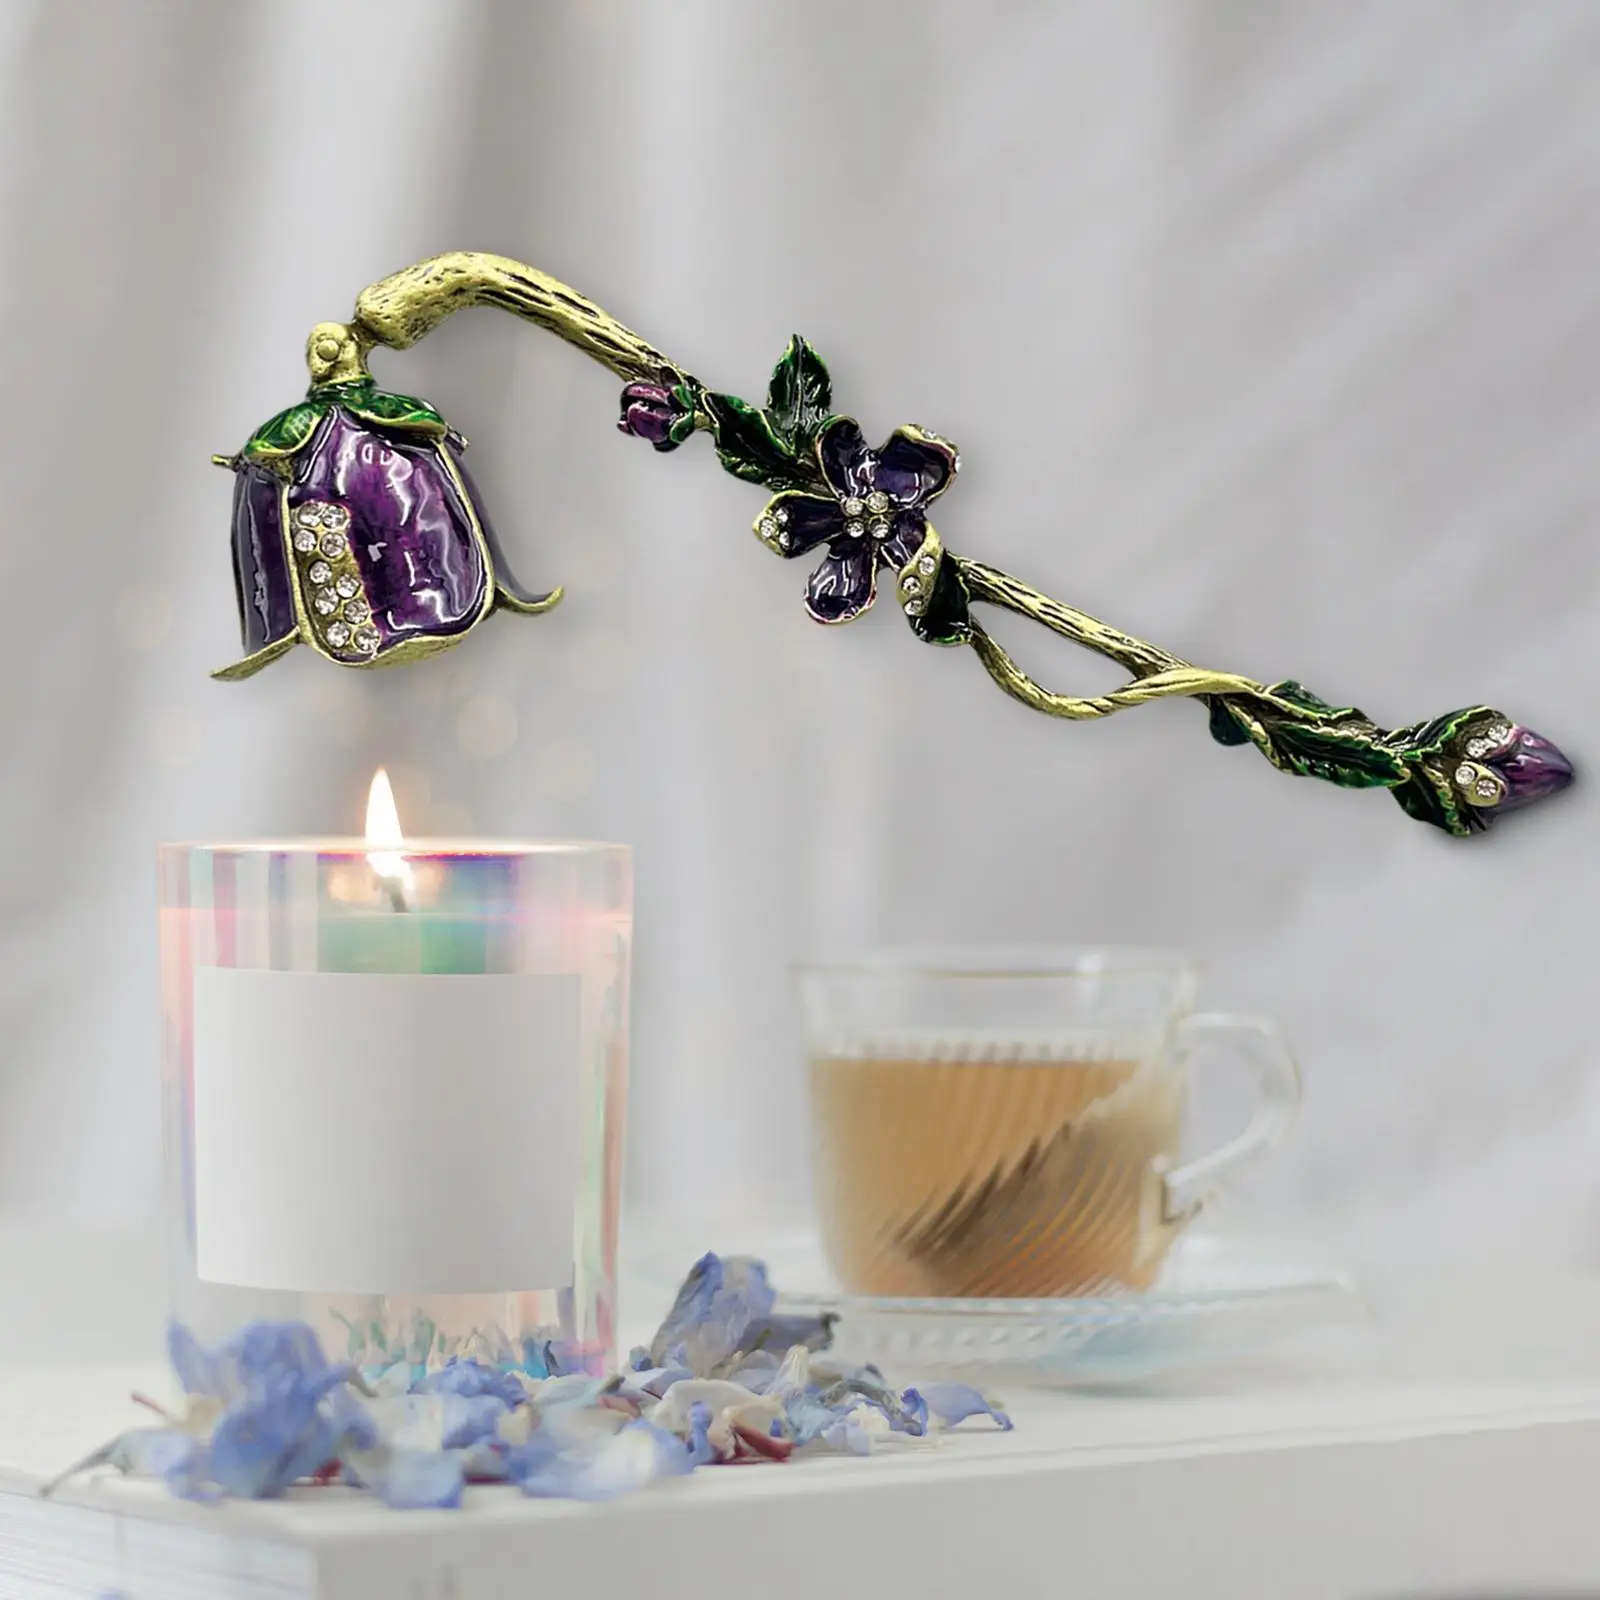 Candle Snuffer Snuff Tool Purple Flowers Shape Accessories Length 16.5cm for